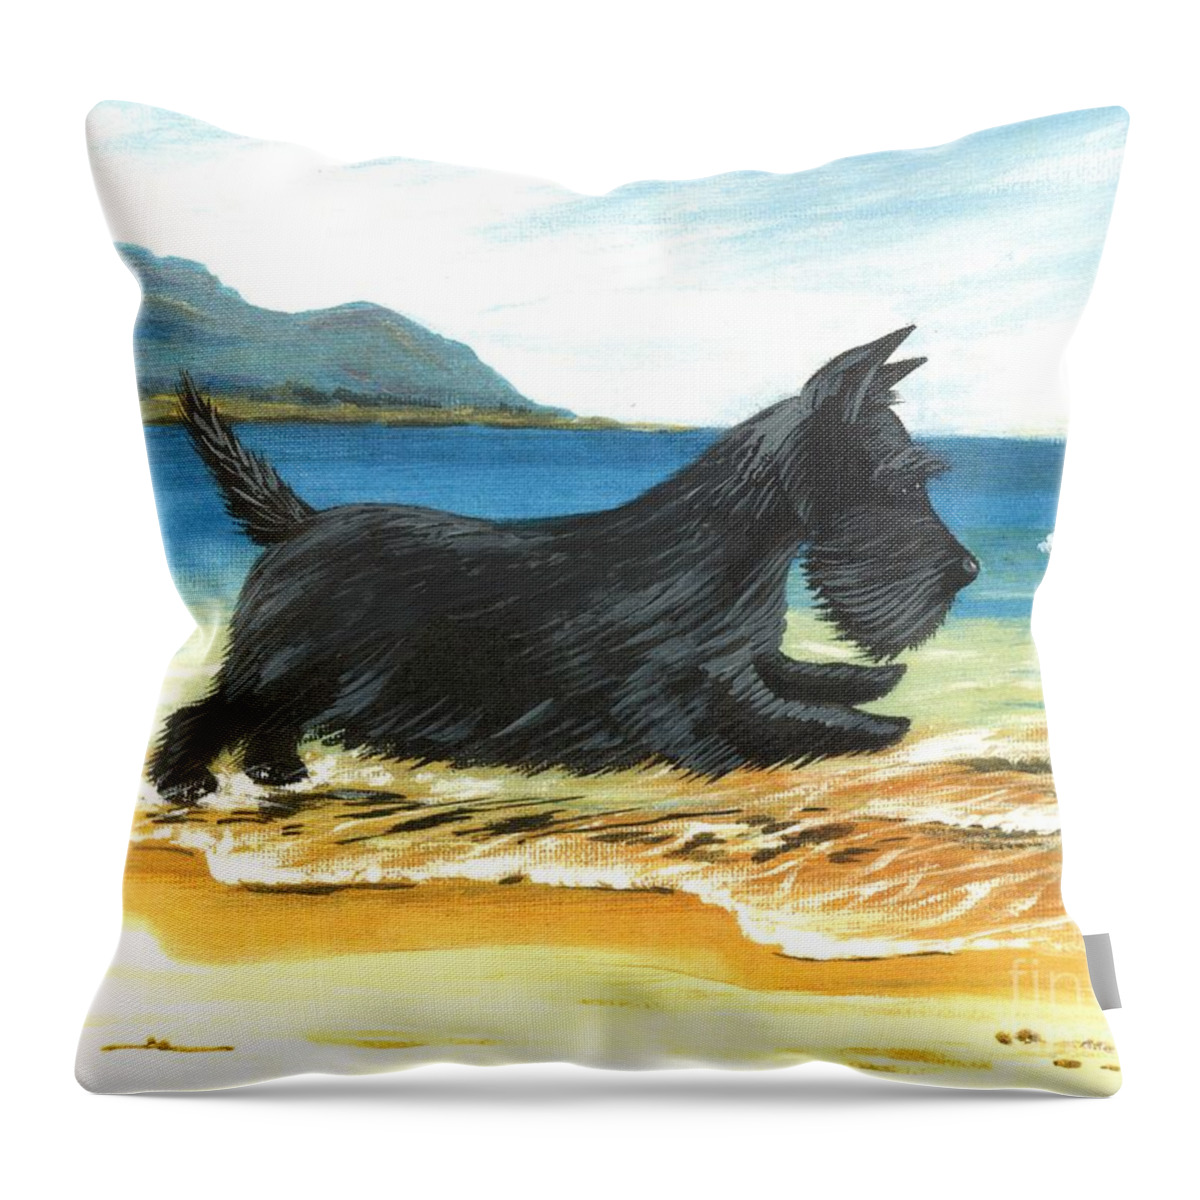 Painting Throw Pillow featuring the painting Scottie At Play by Margaryta Yermolayeva